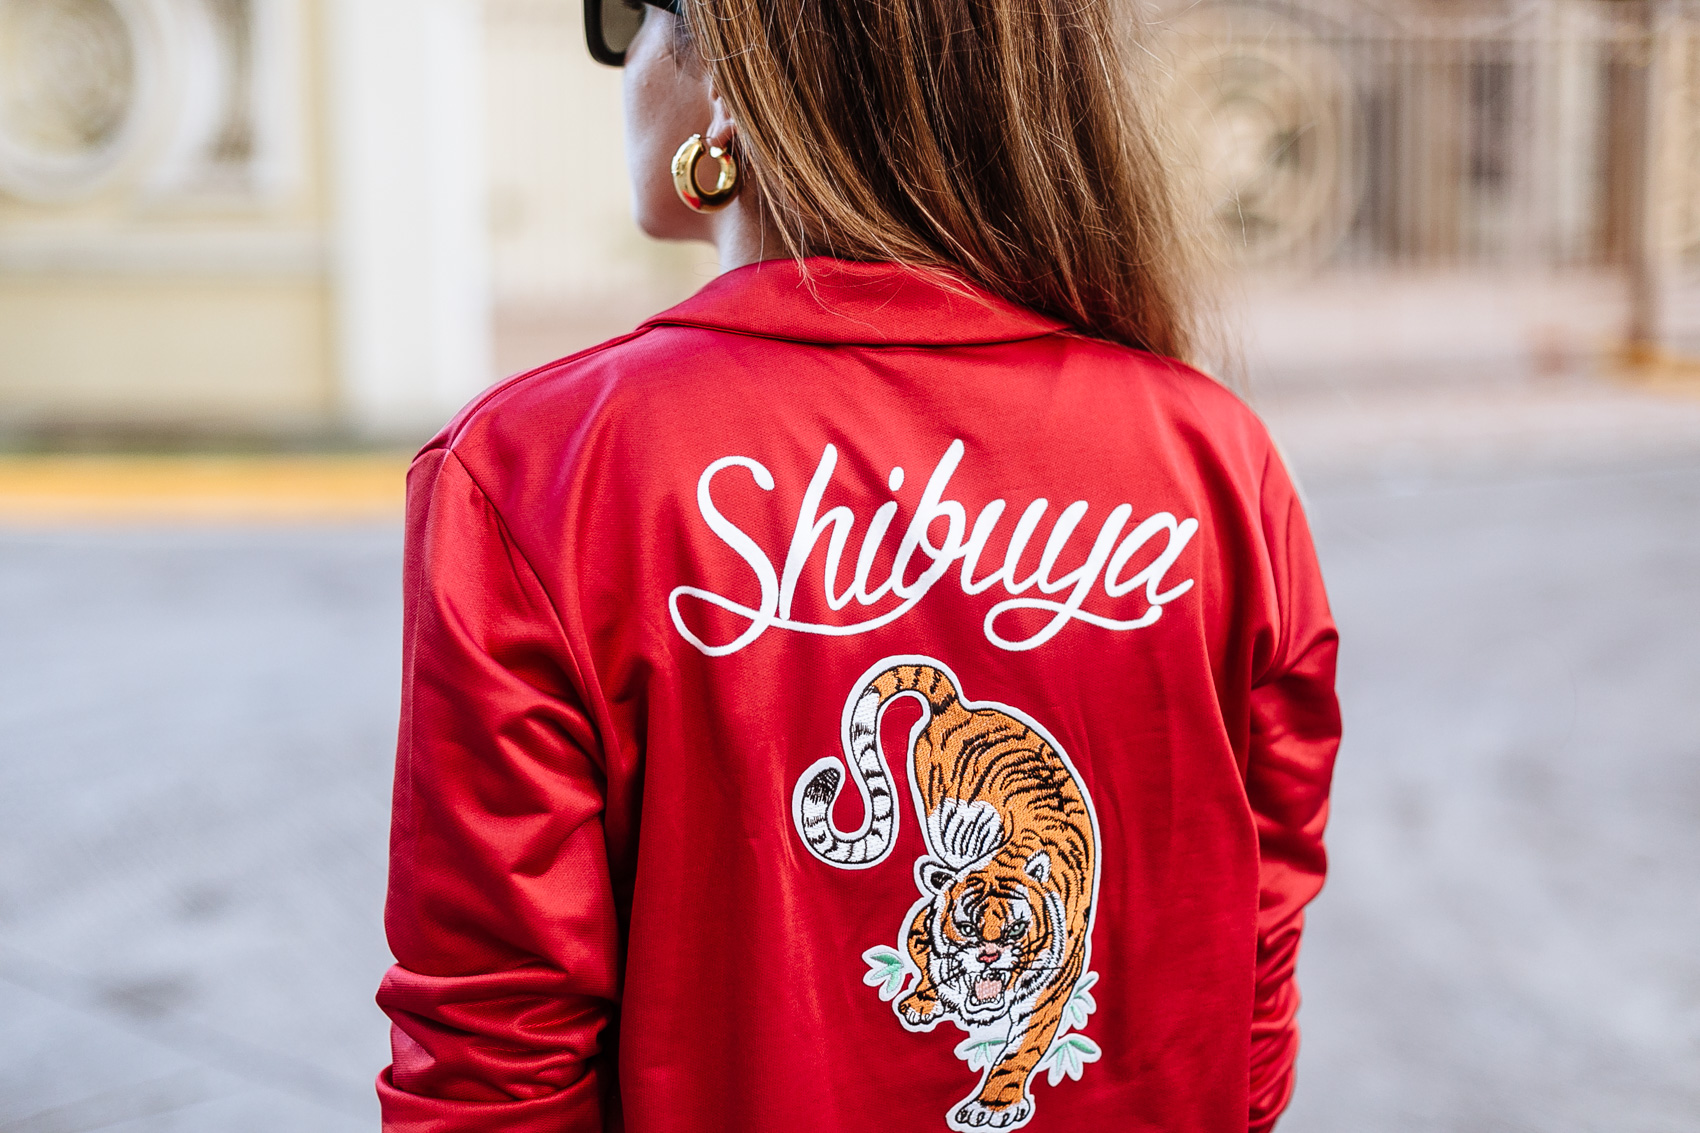 Gucci inspired red satin jacket with embroidery on the back